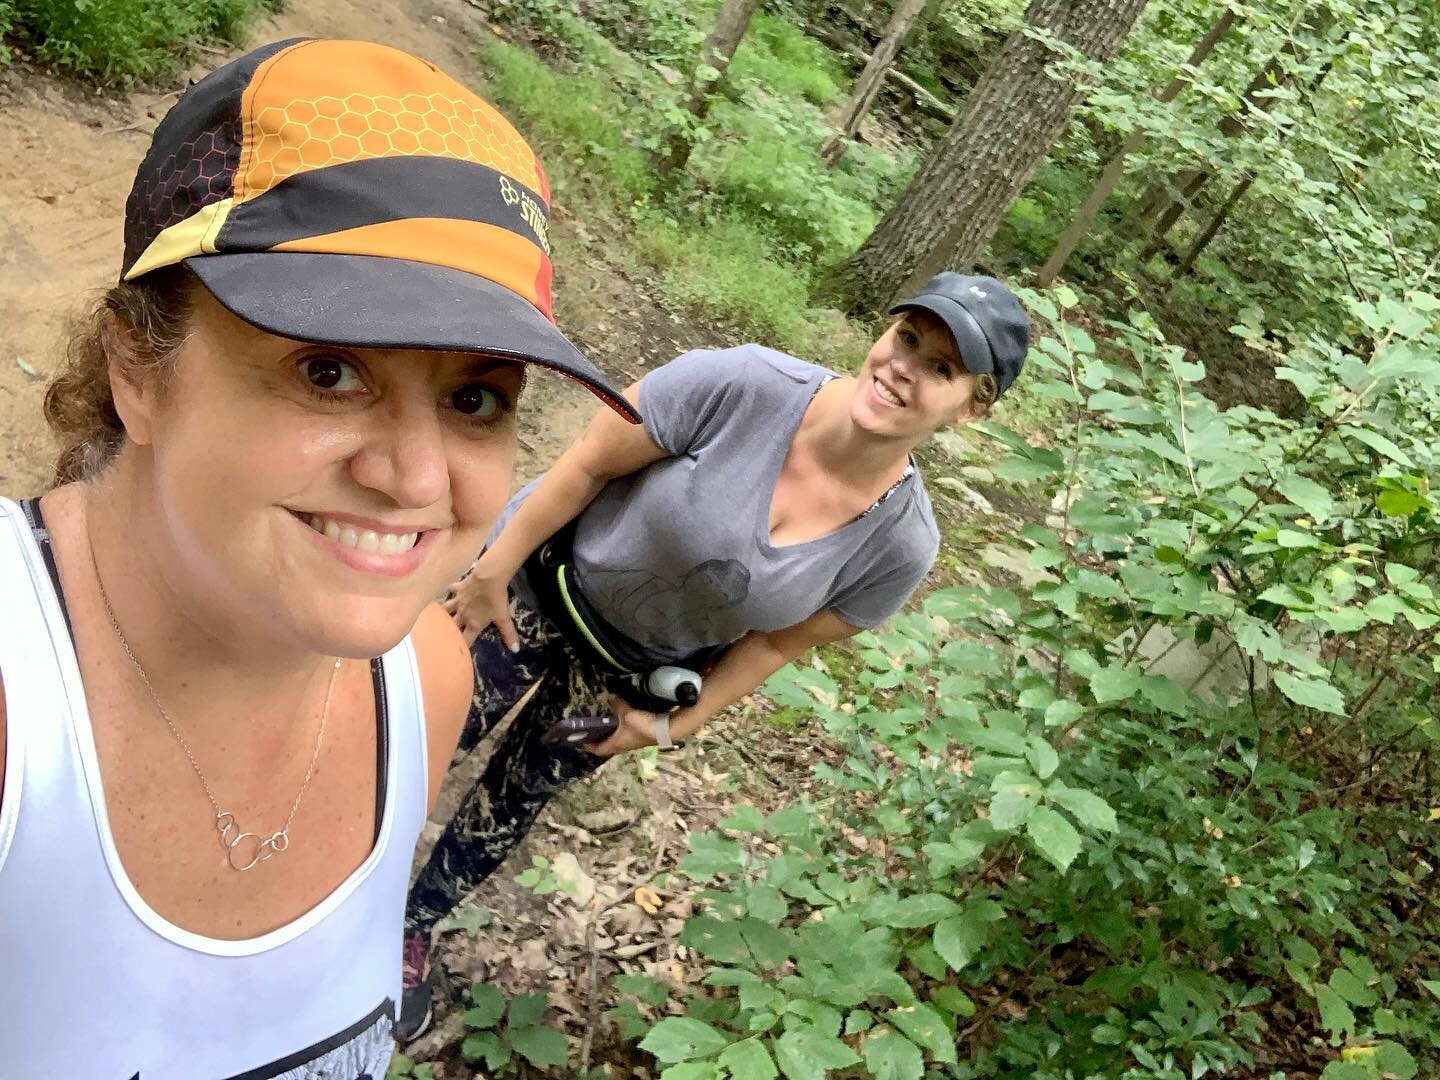 Gray days in the woods with @psuconway &amp; Grace are the best! Less bugs today, less humidity &amp; lots more mushrooms 🍄 for our 3.3 mile hike. So thankful 🥰
#hikepa #beautifulpa #friendsthathike #dietitiansofinstagram #hiking #trailsisters #unl